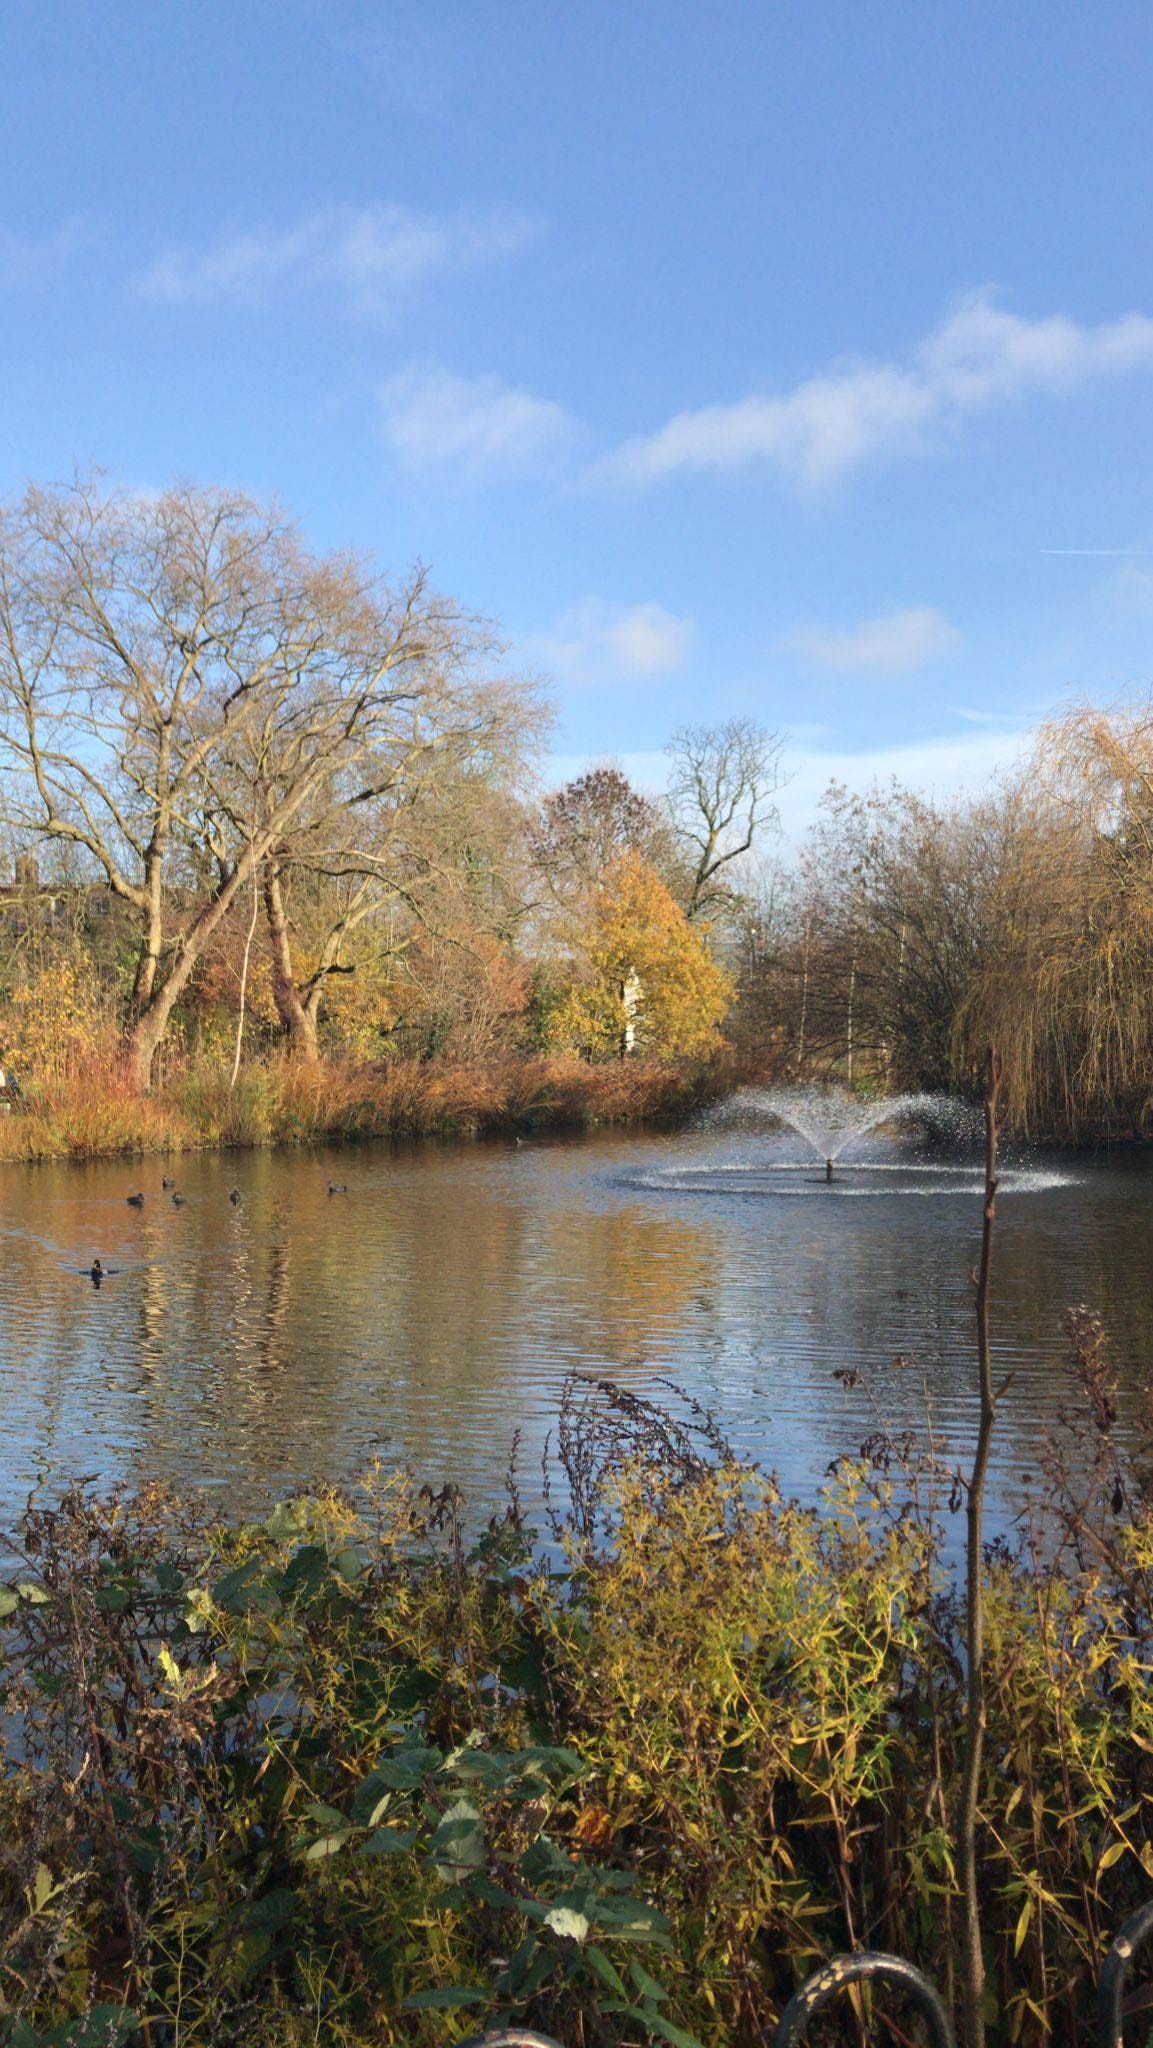 Image of a pond,with autumnal trees around, a fountain in the middle and blue skies